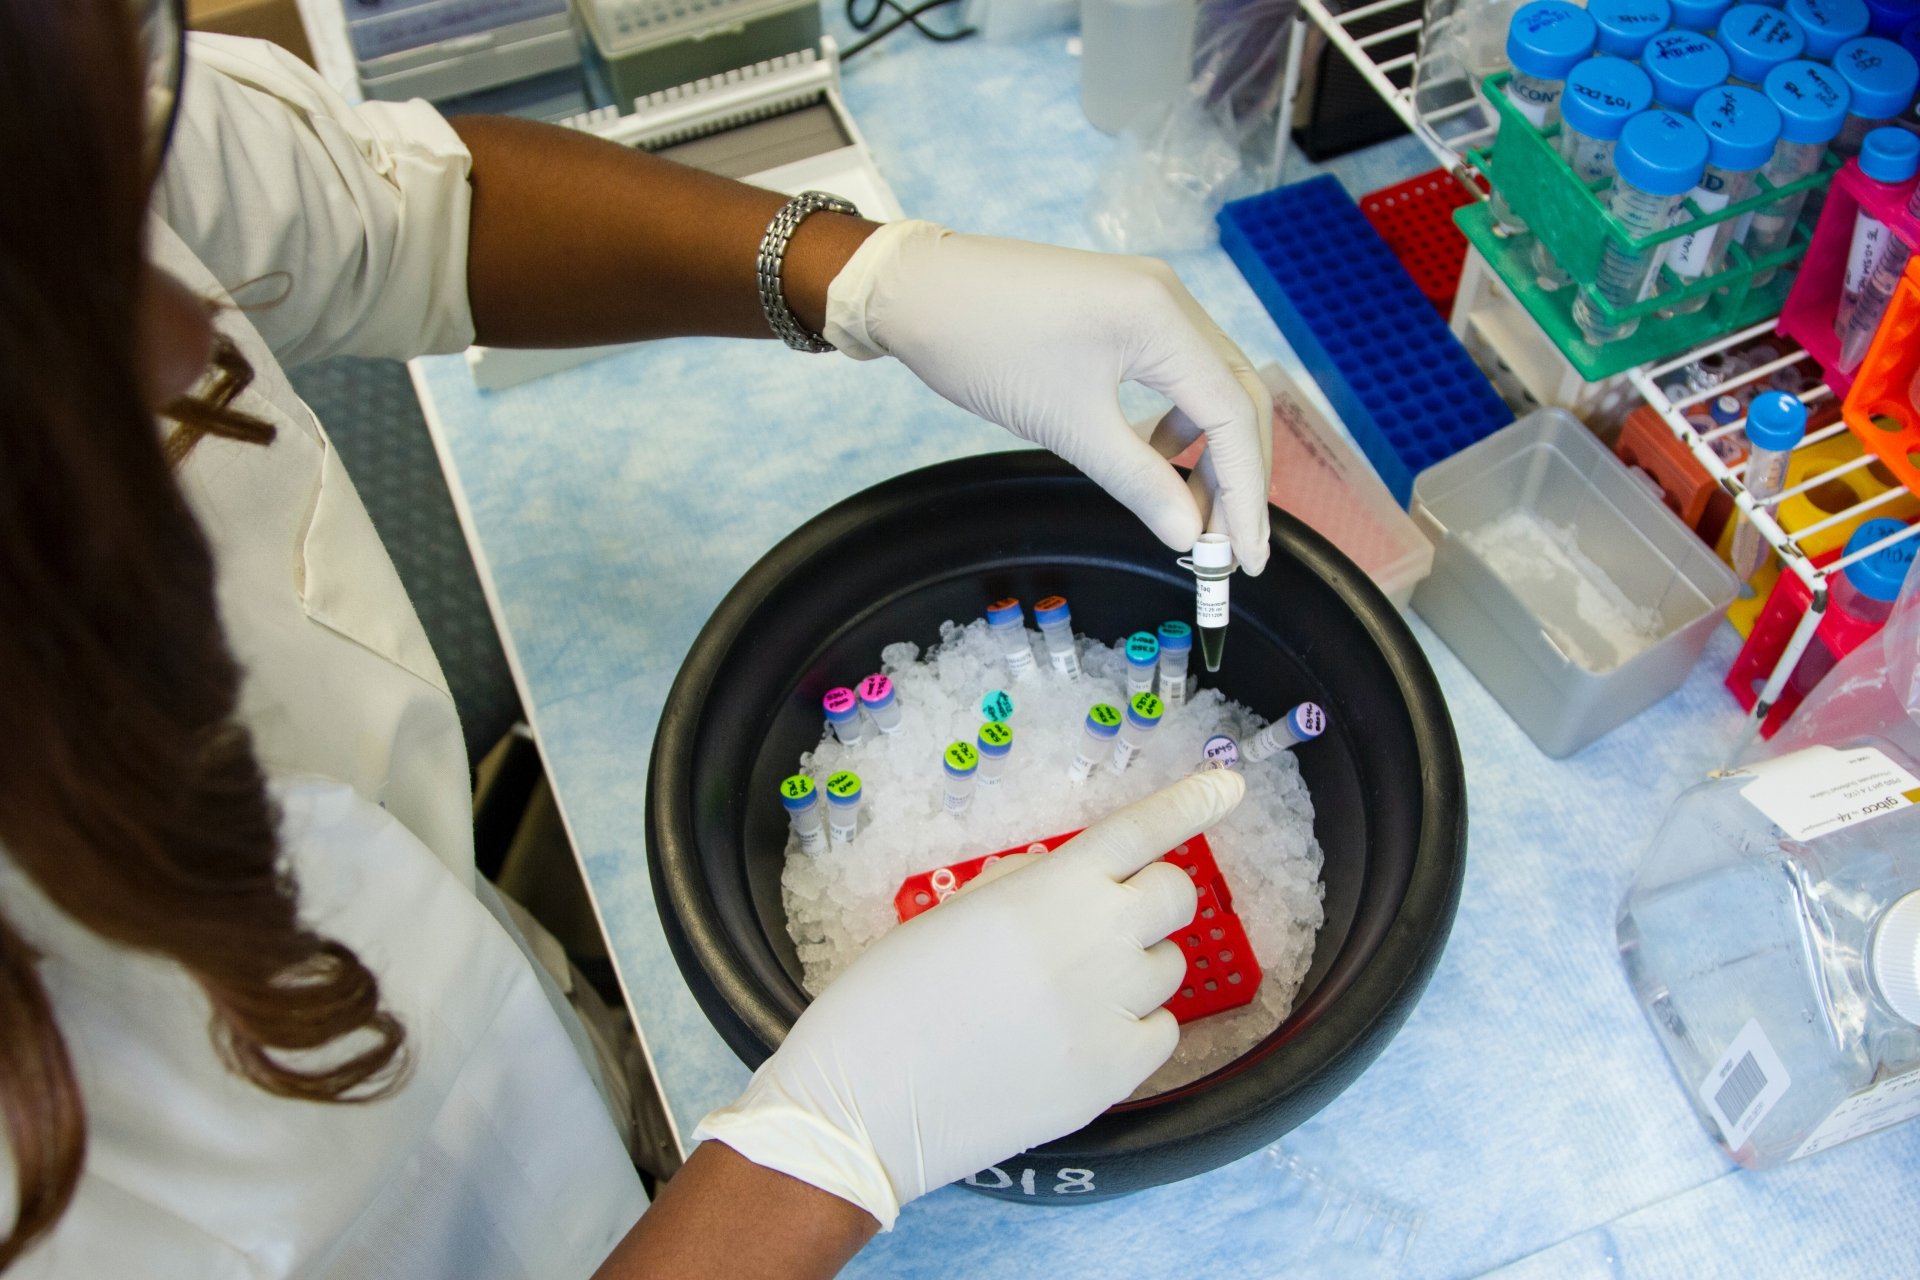 "Laboratory Researcher. National Cancer Institute researcher Chanelle Case Borden, Ph.D., setting up genetic samples and primers for polymerase chain reaction, or PCR, a laboratory technique used to make multiple copies of a segment of DNA. Photographer Daniel Sone"